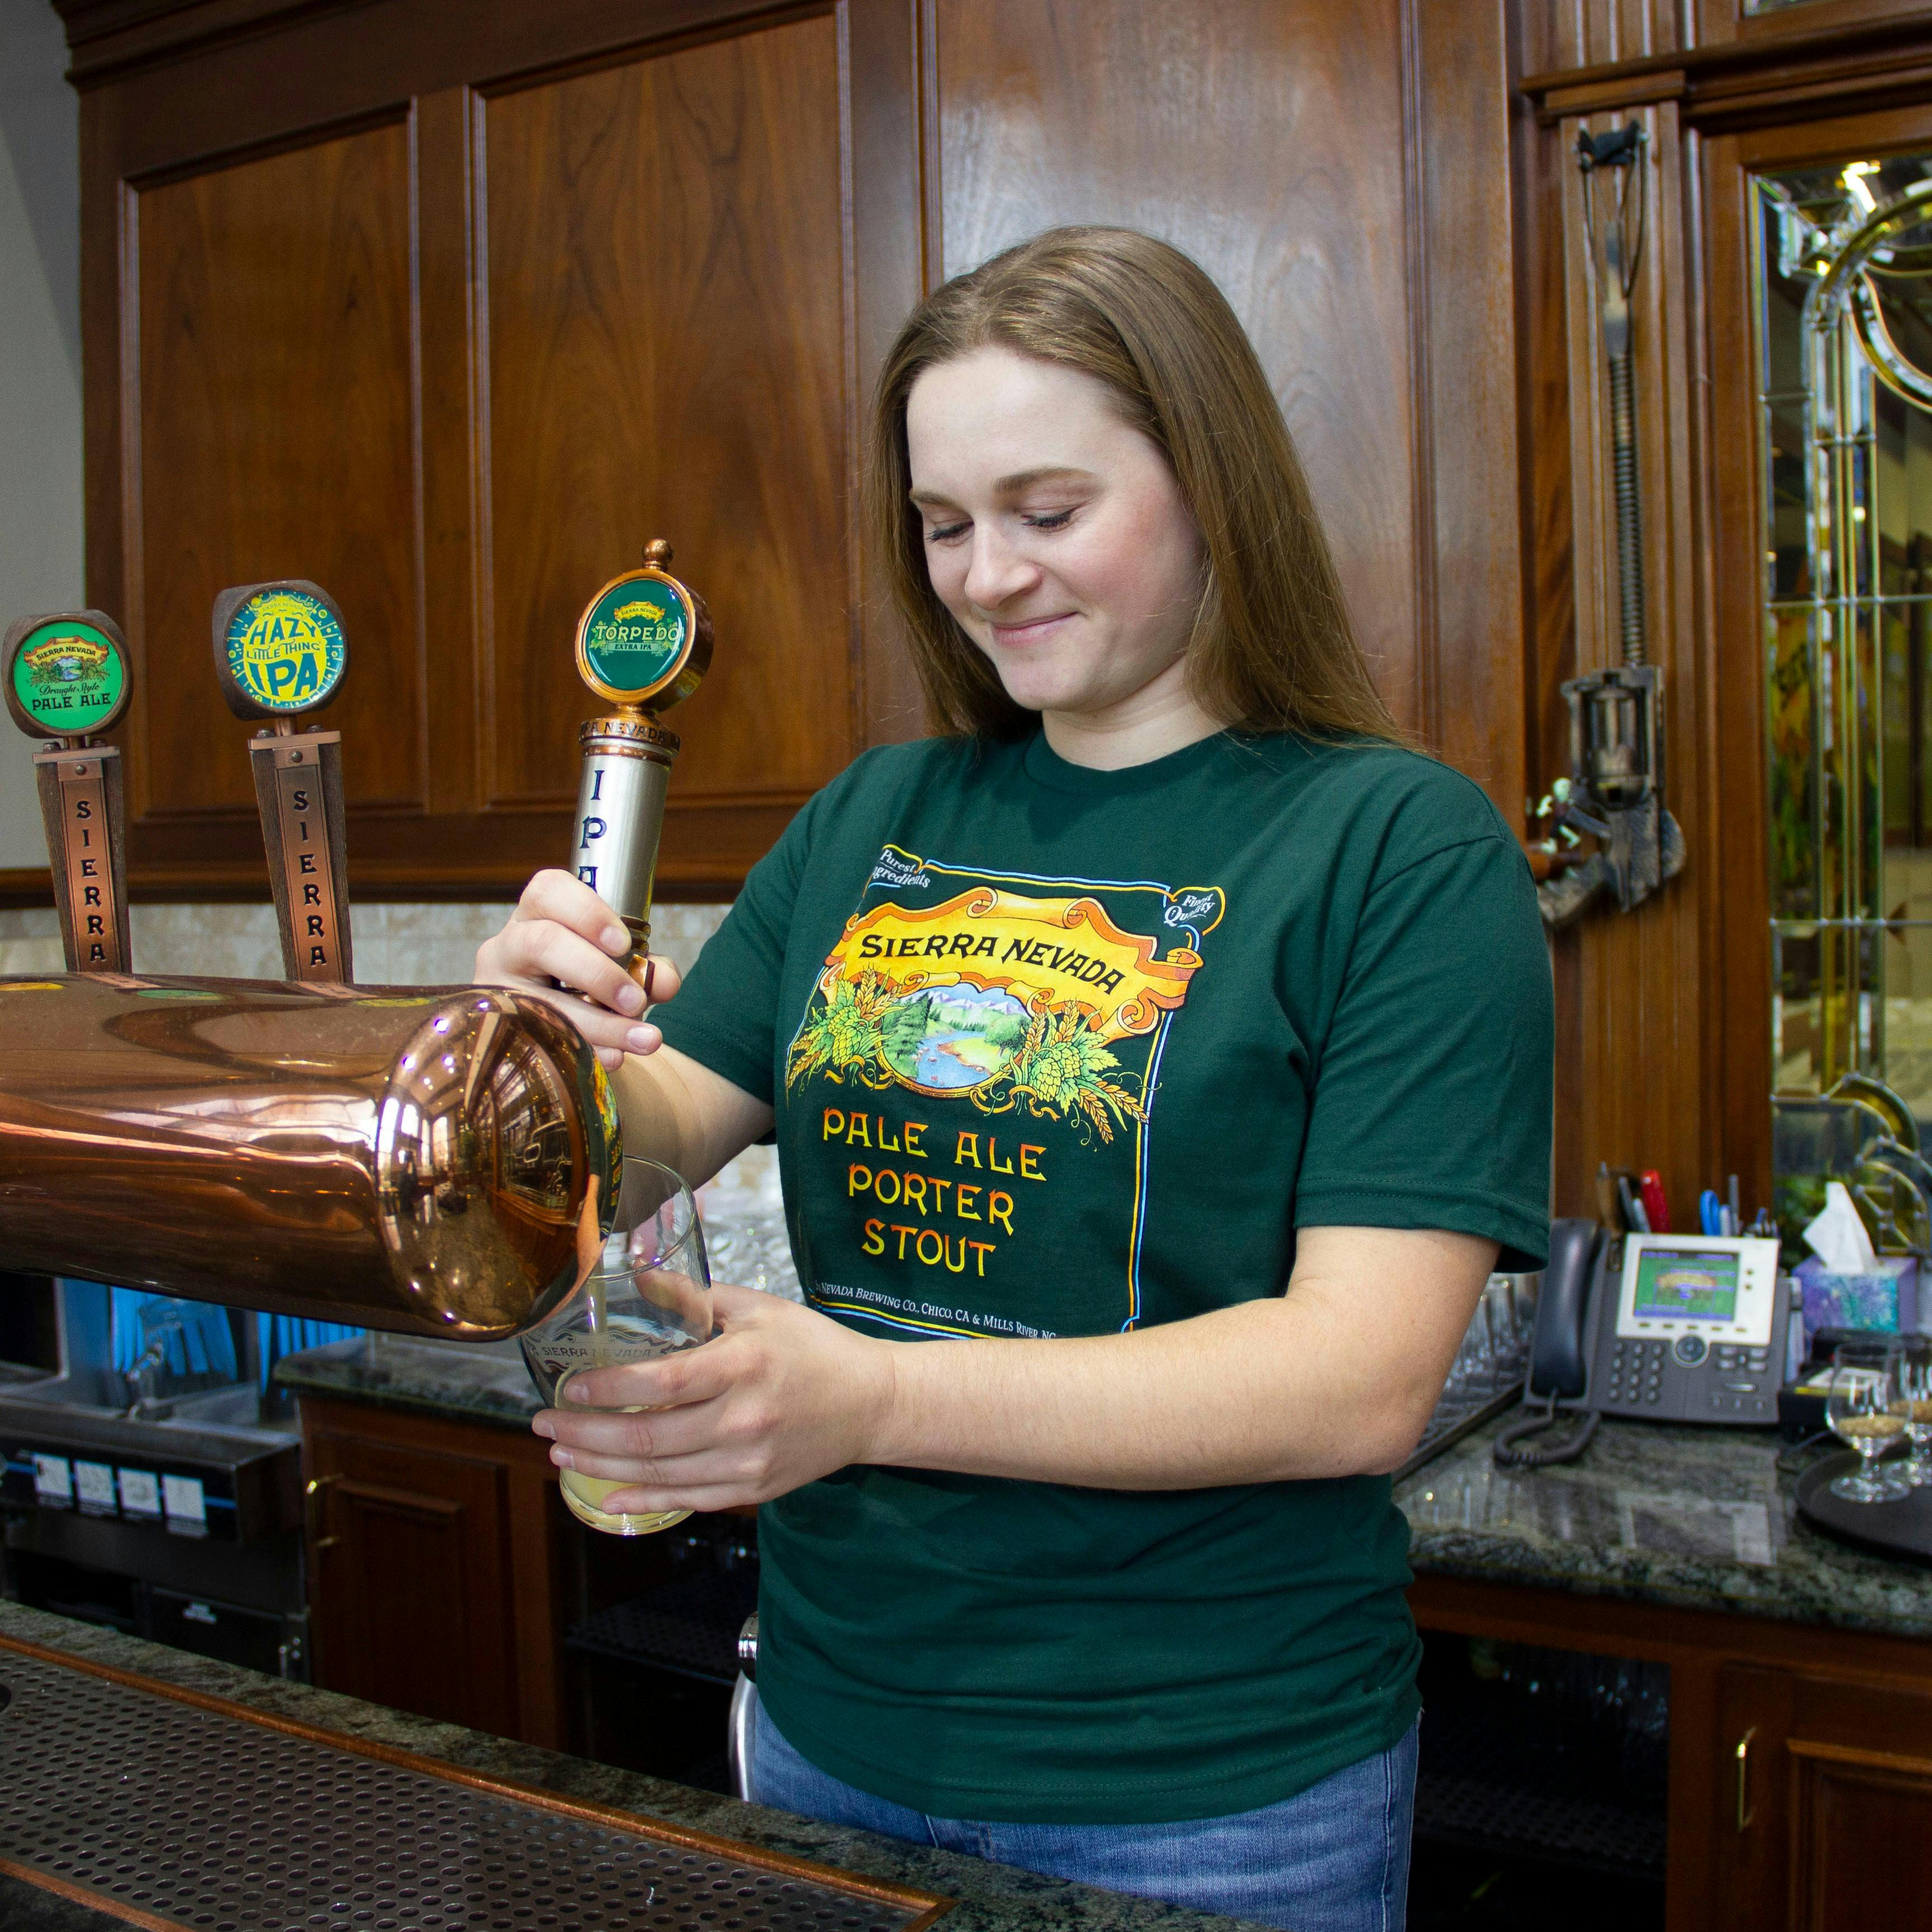 Sierra Nevada Pale Ale - Porter - Stout short sleeve green t-shirt worn by a woman in a brewery filling a pint glass from the tap